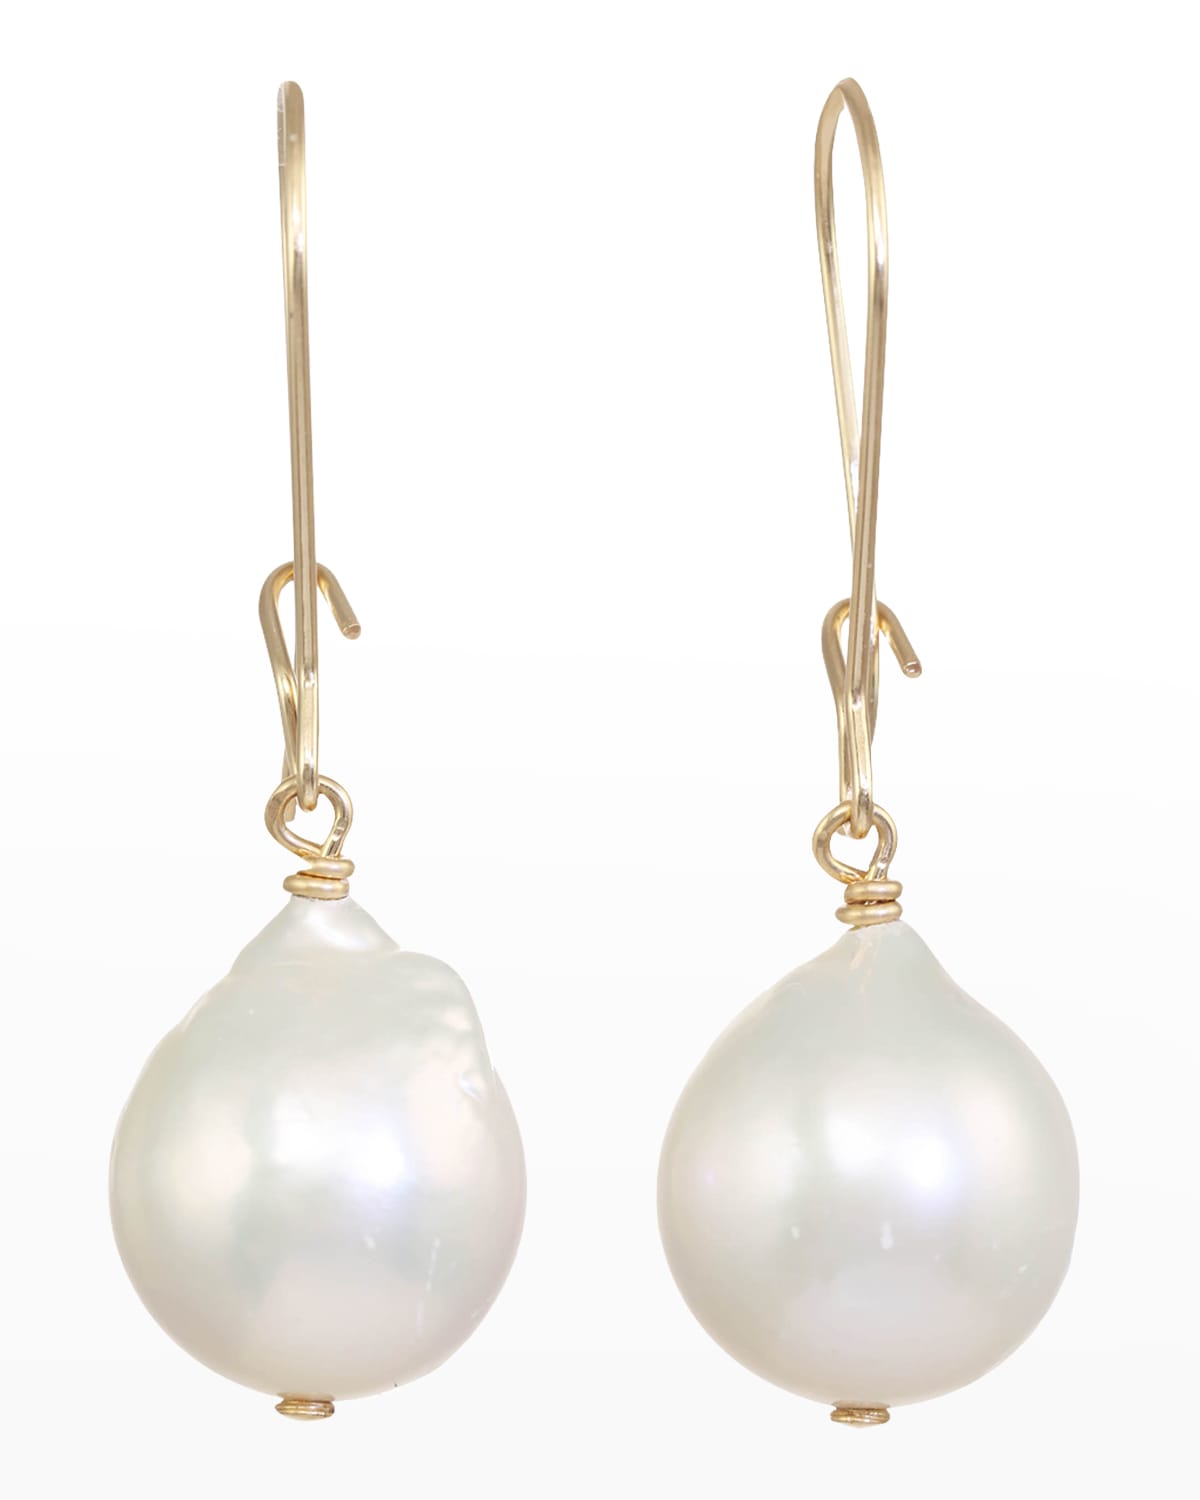 Margo Morrison Baroque Pearl Earrings with 14k Gold Fill